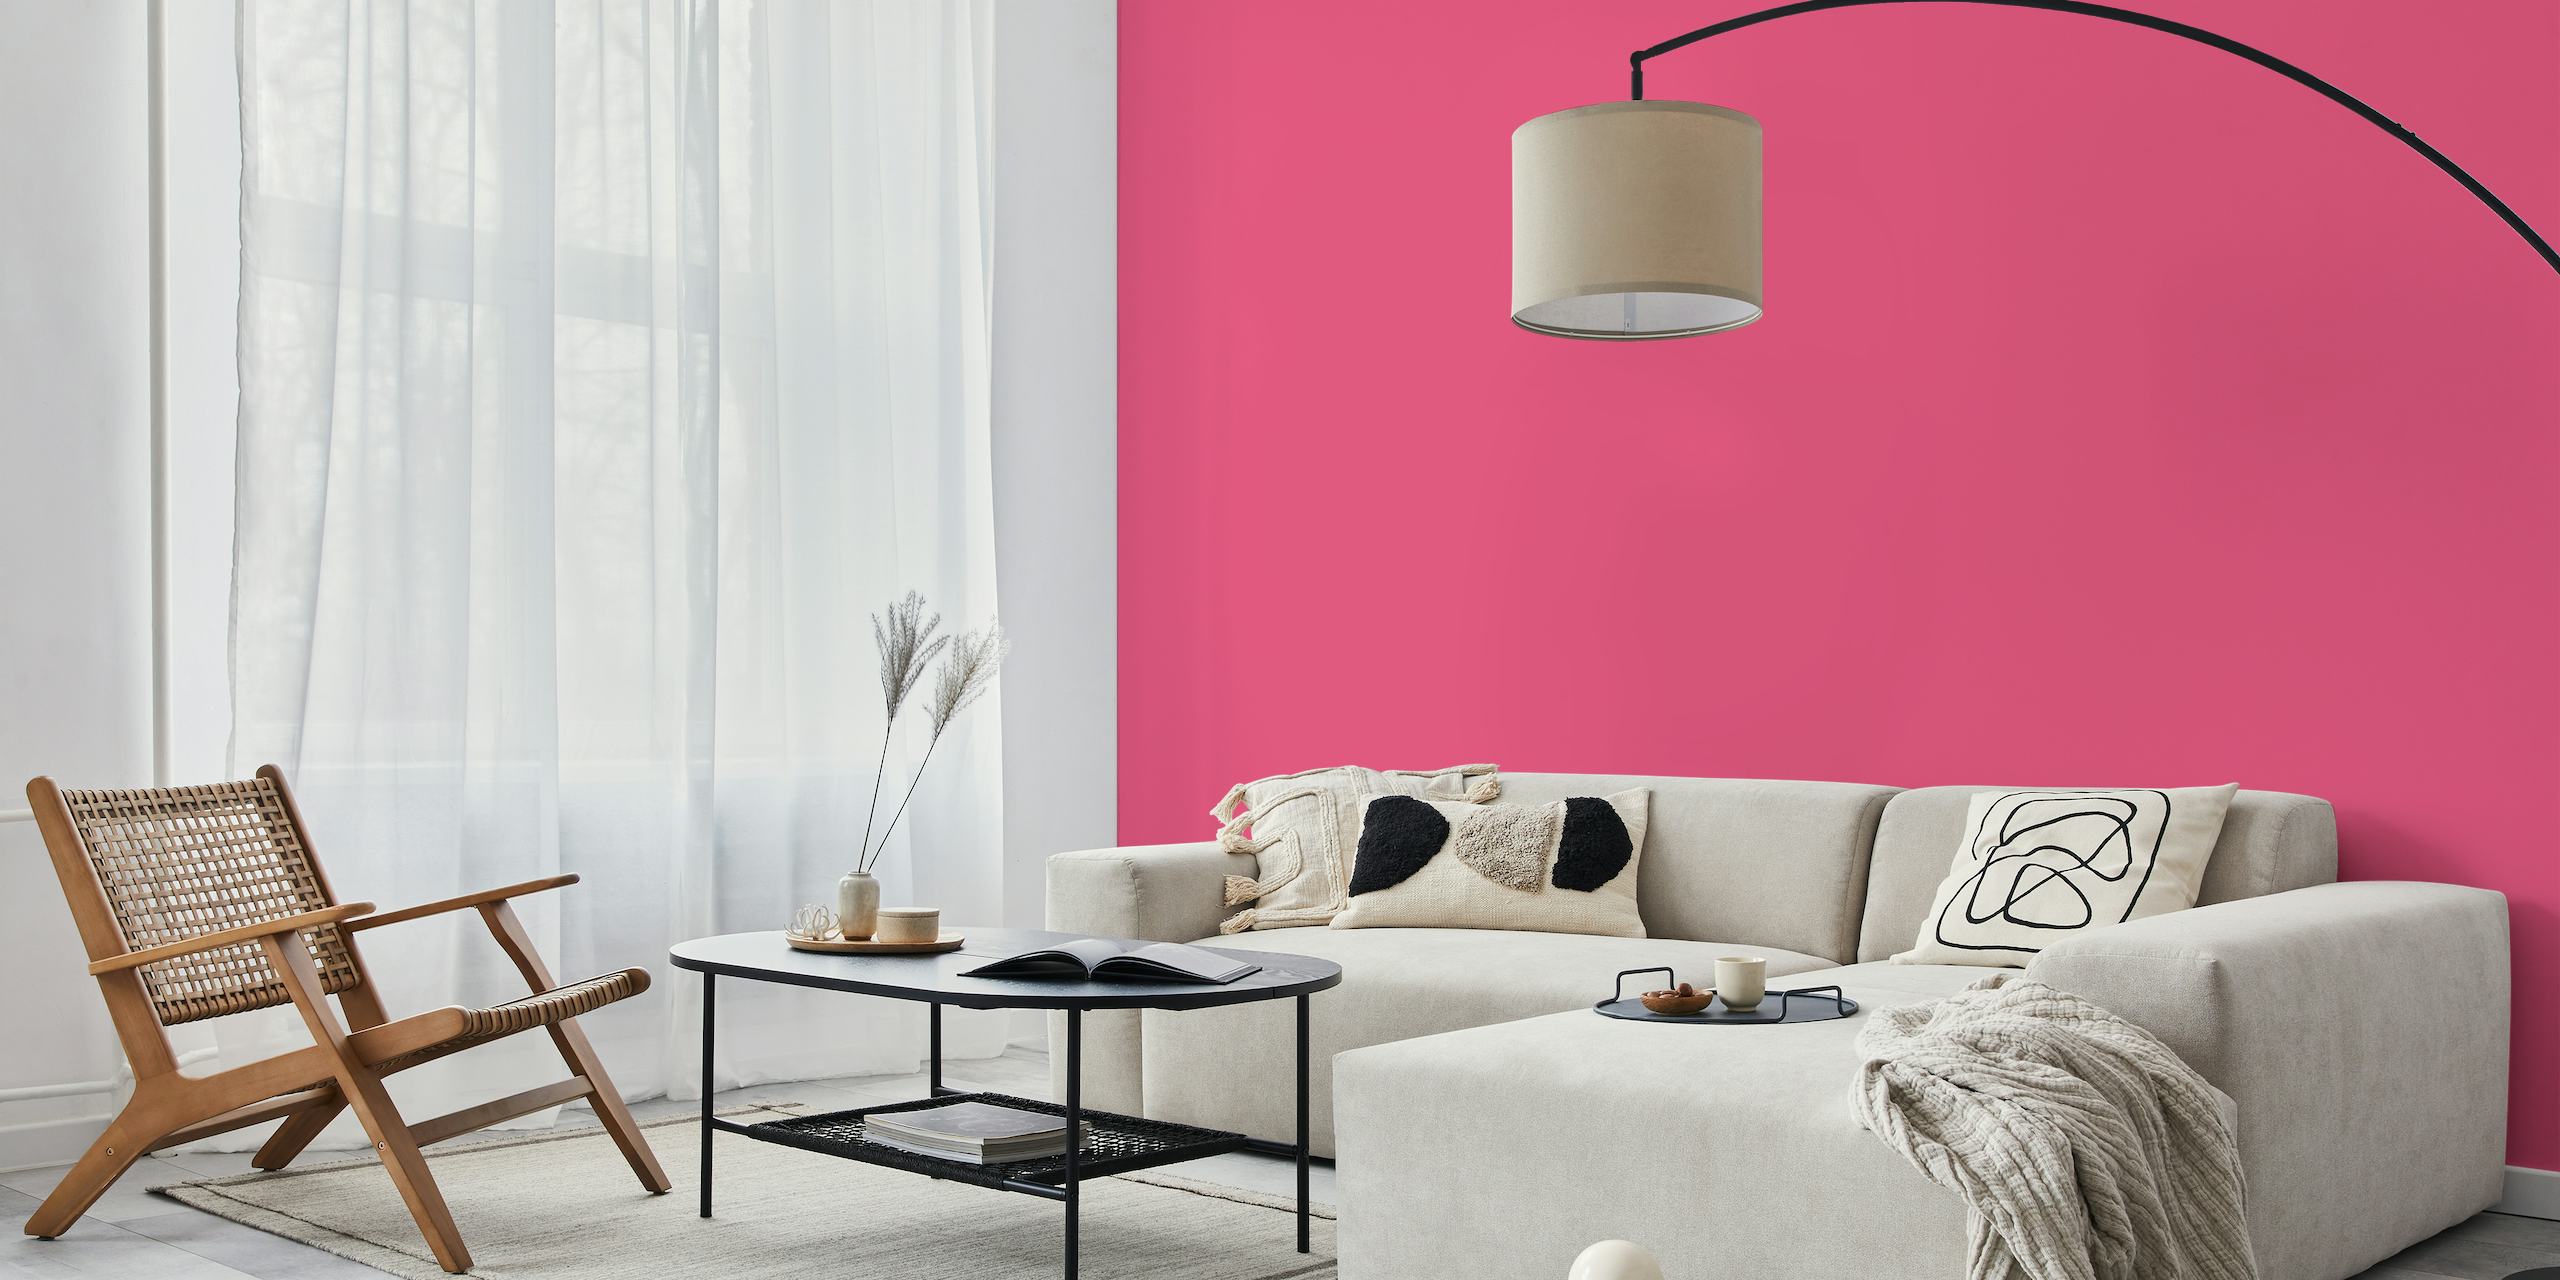 Solid Color - Hot Pink wall mural for interior decor